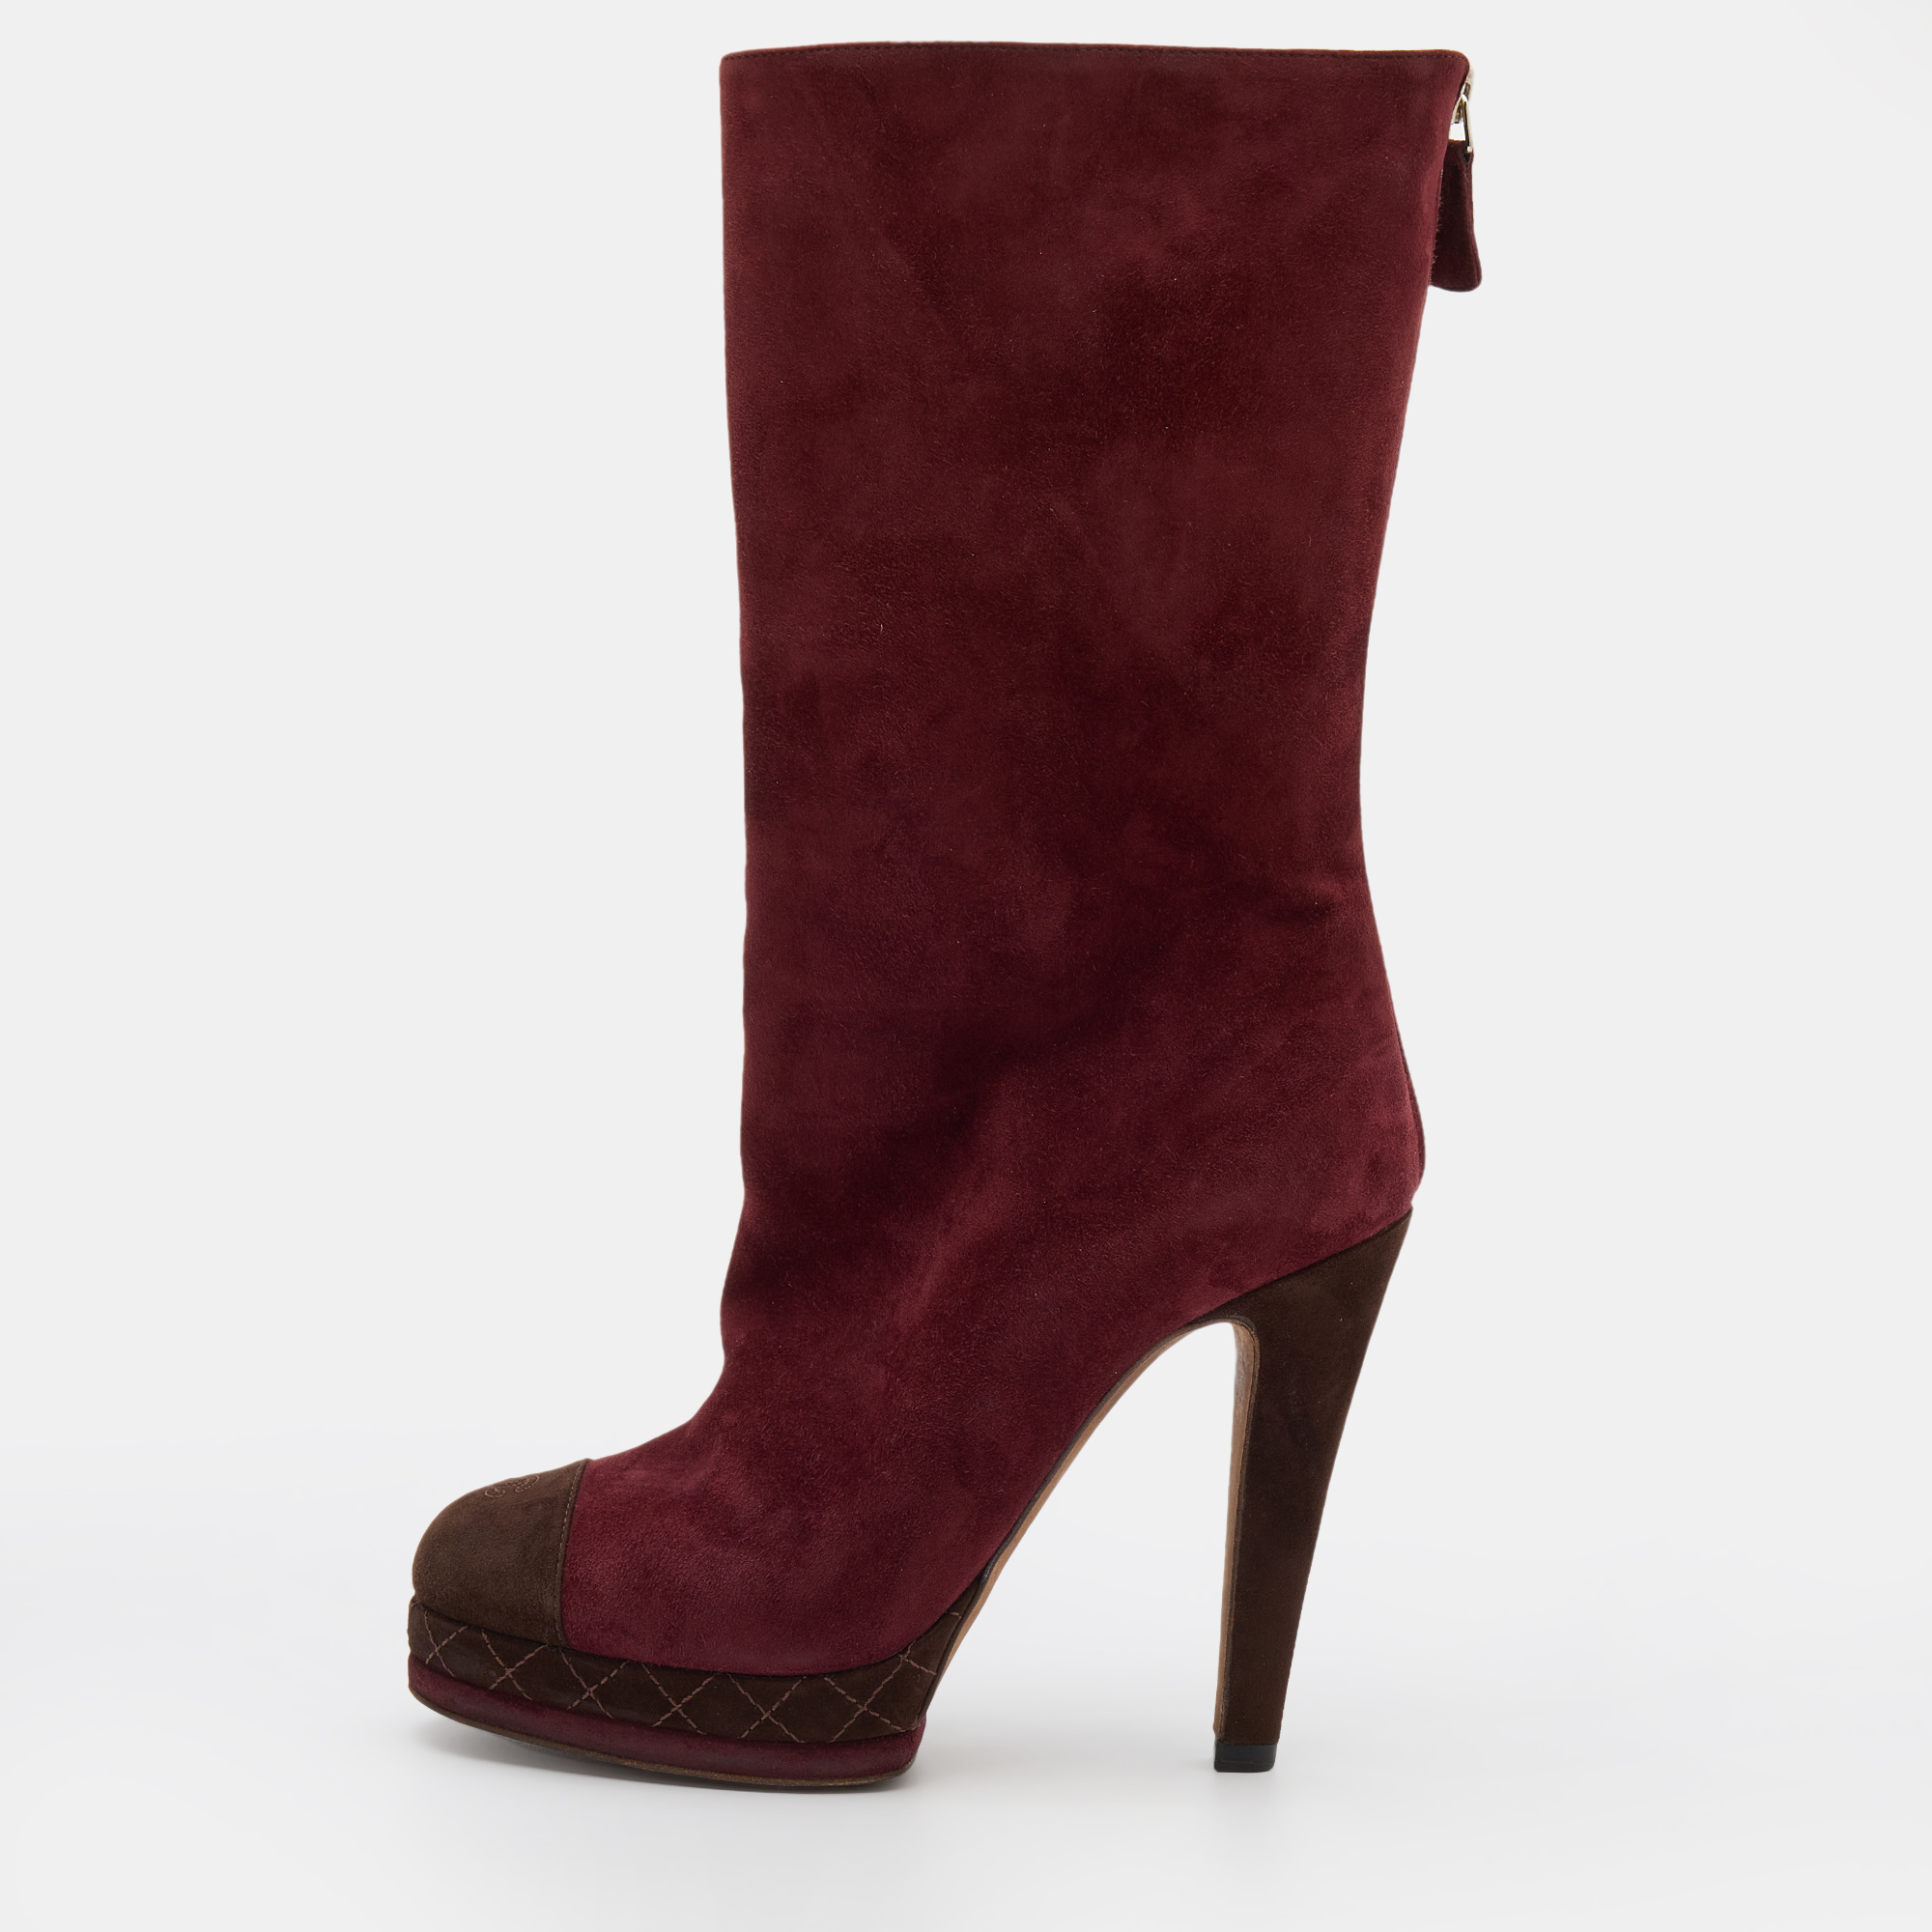 Pre-owned Chanel Burgundy/brown Suede Cc Platform Mid Calf Length Boots Size 38.5